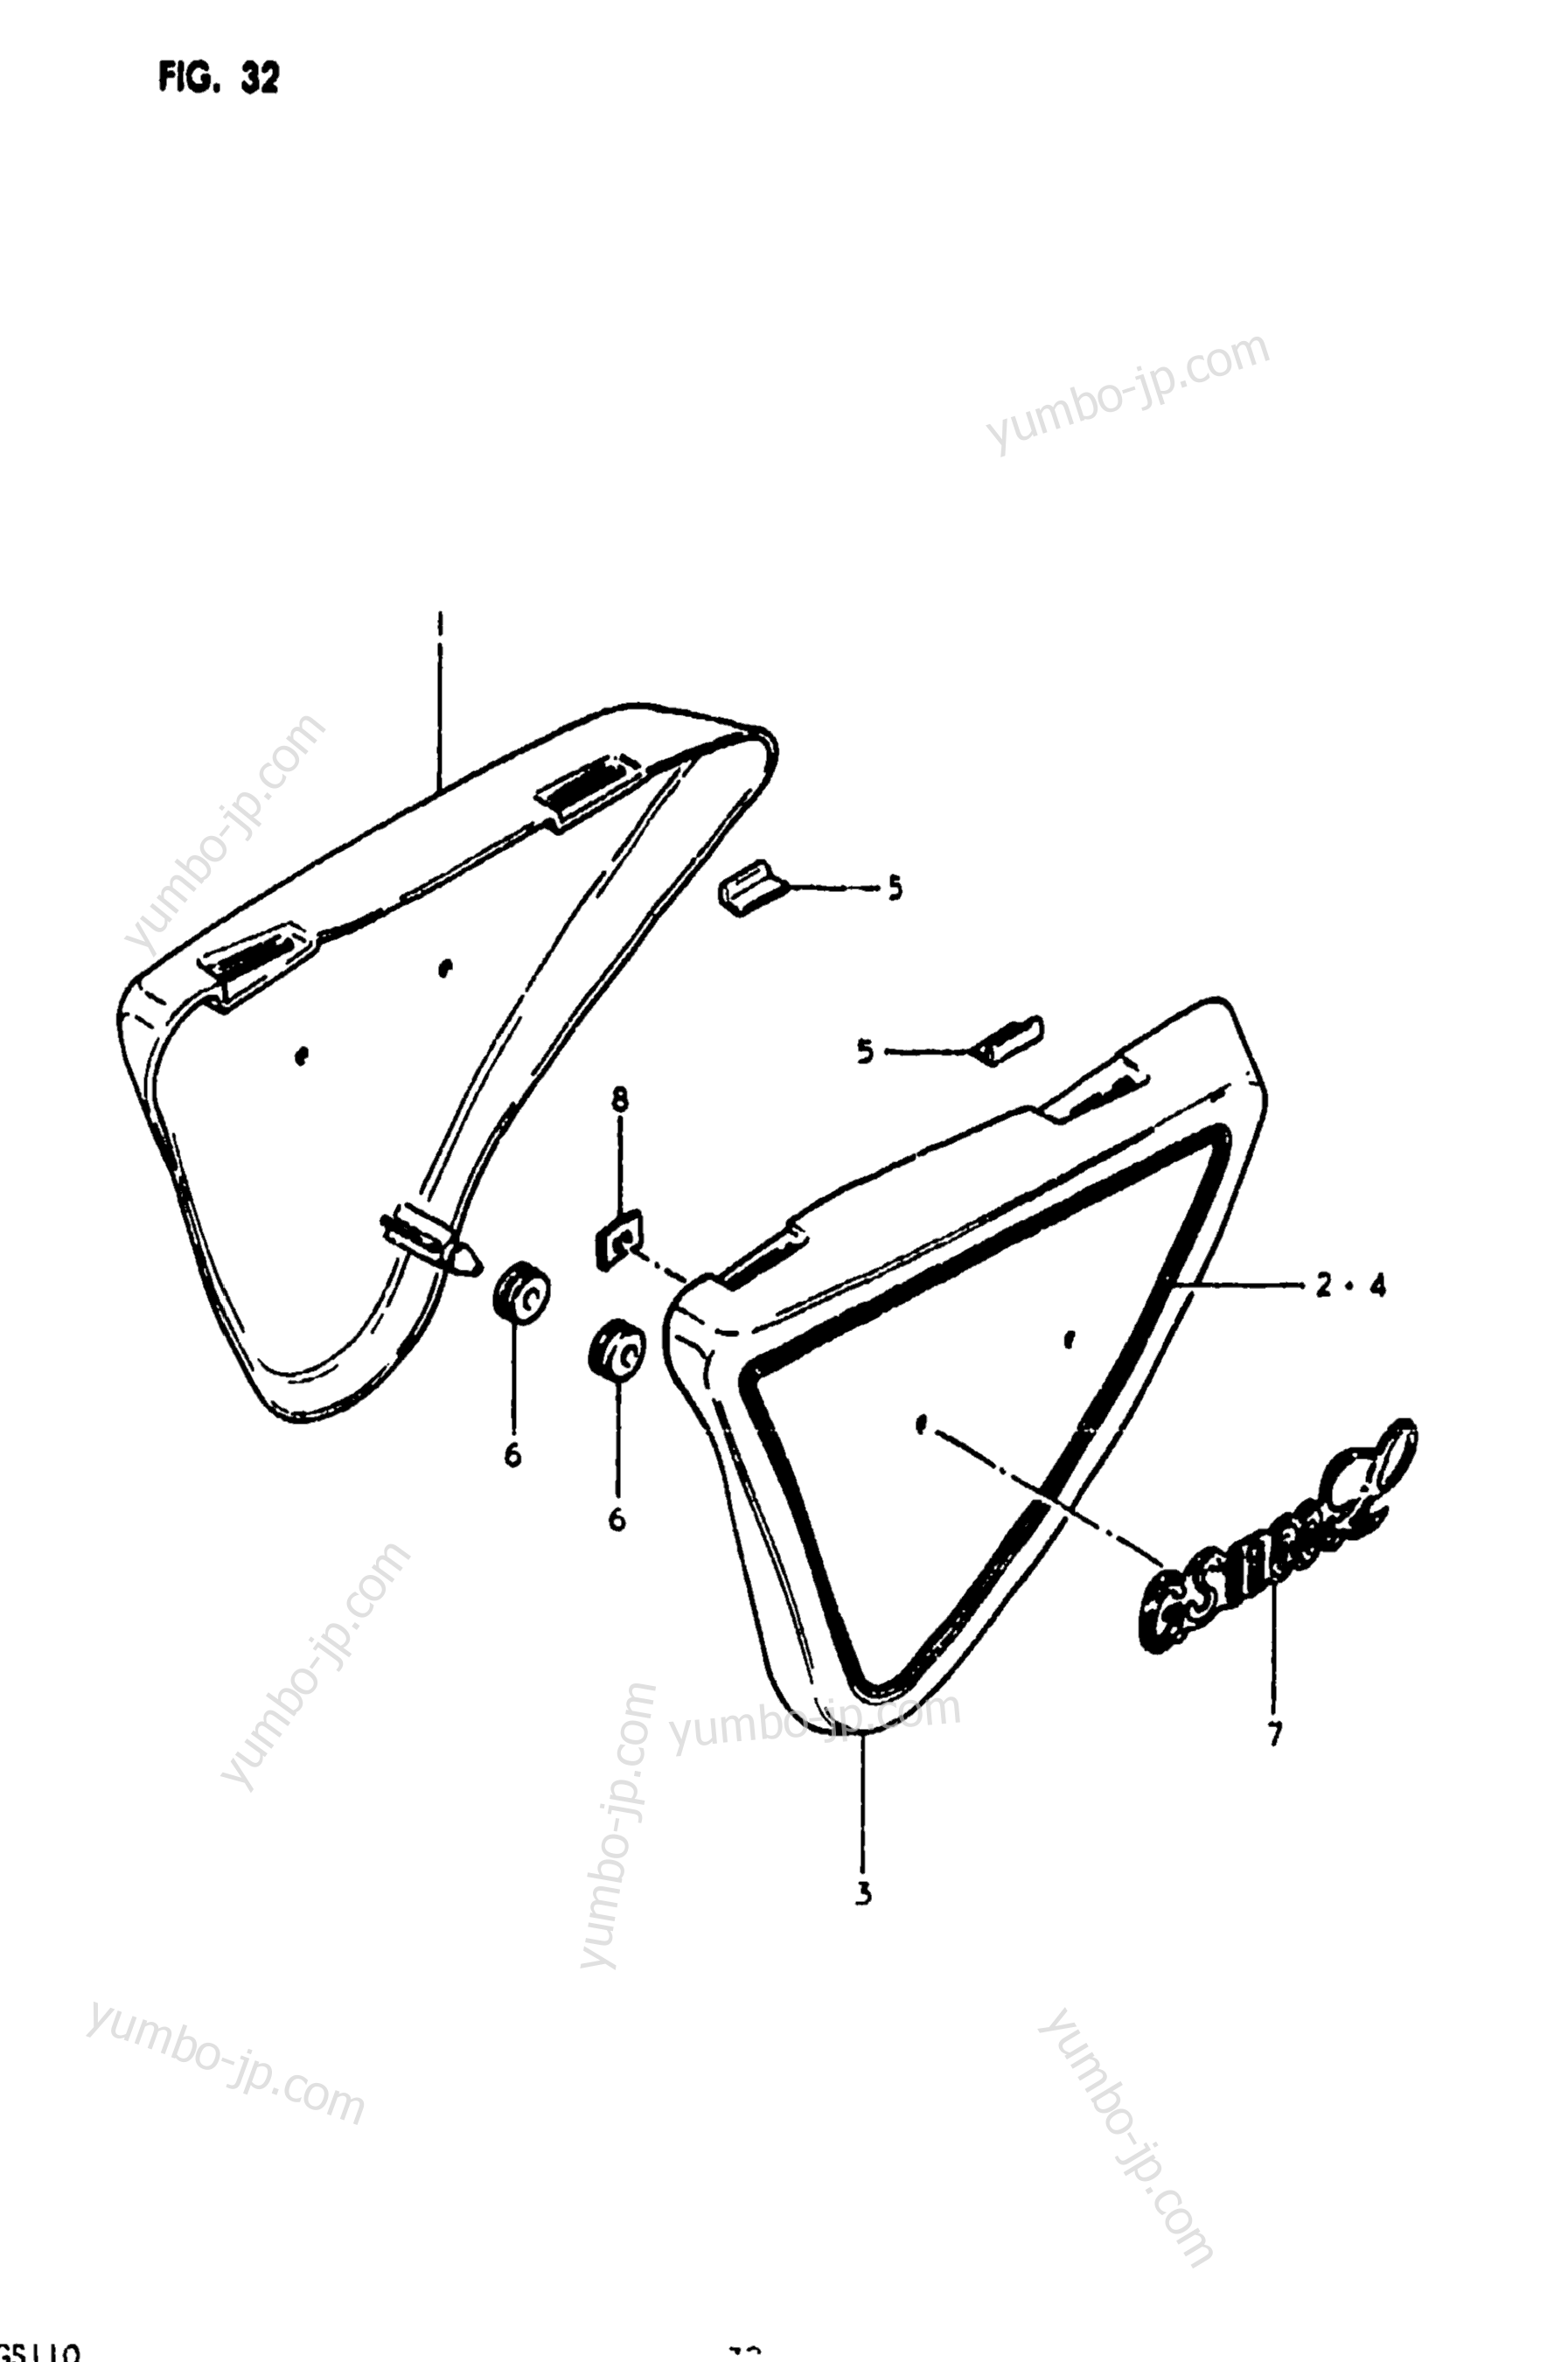 FRAME COVER for motorcycles SUZUKI GS1100LT 1980 year